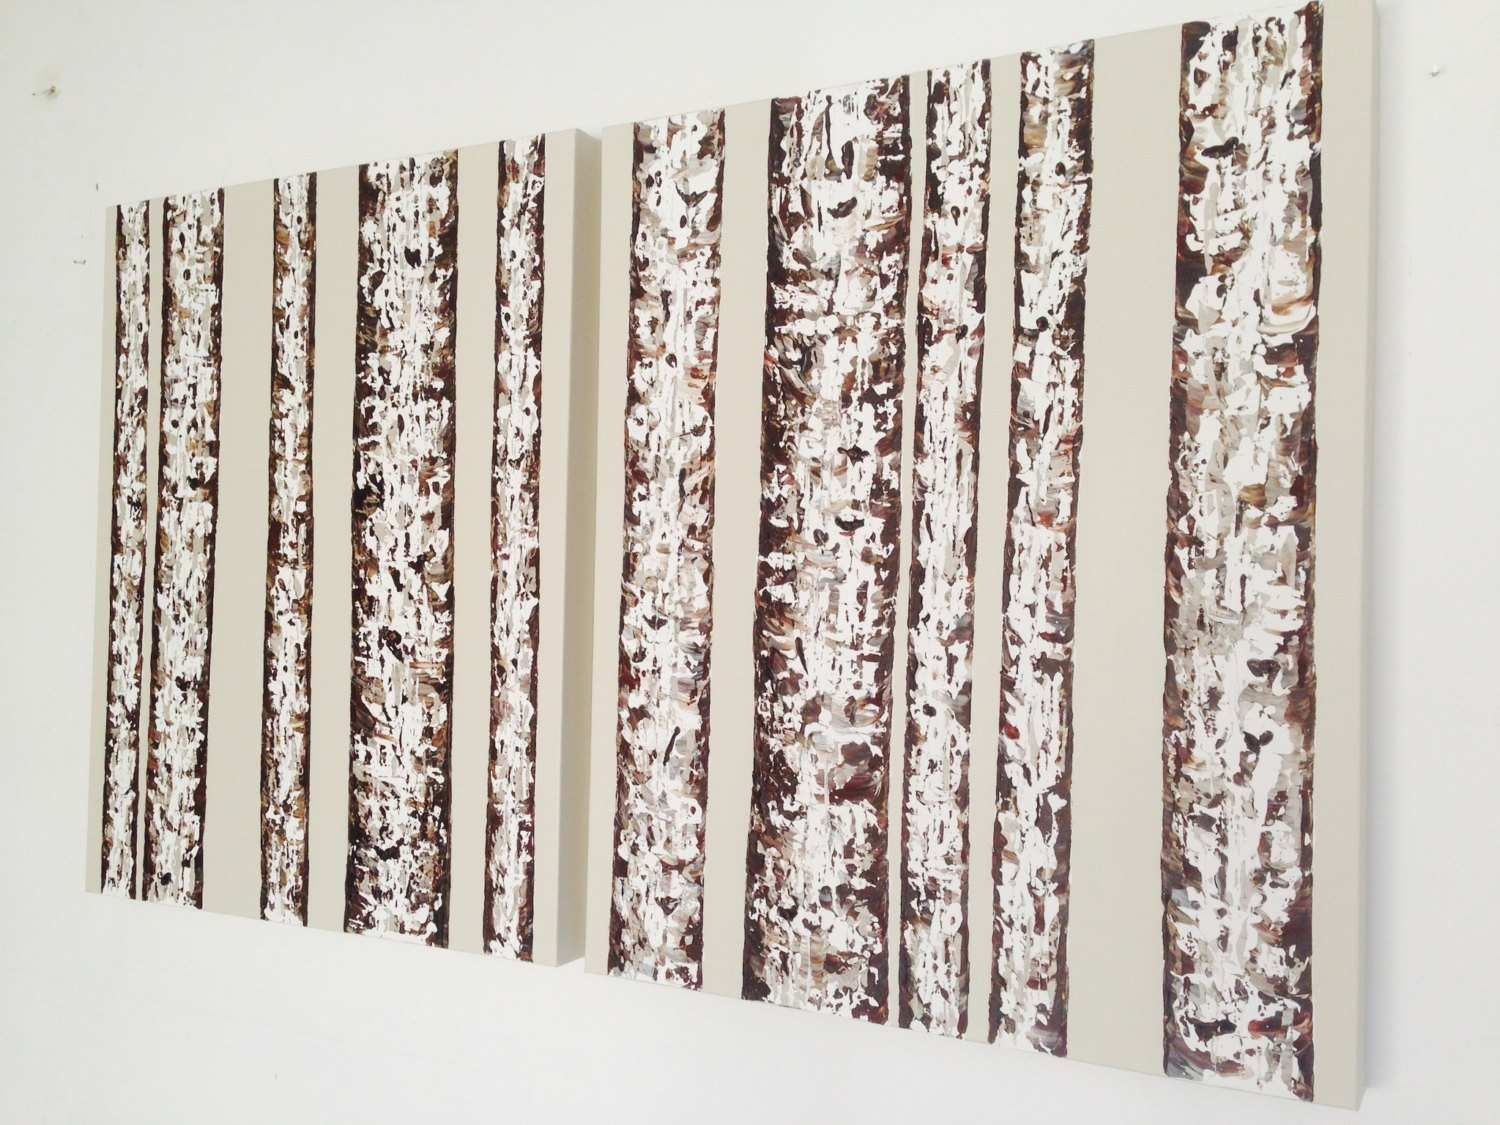 Birch Tree Paintings On Canvas Lovely Birch Art Birch Tree Painting With Birch Tree Wall Art (View 10 of 20)